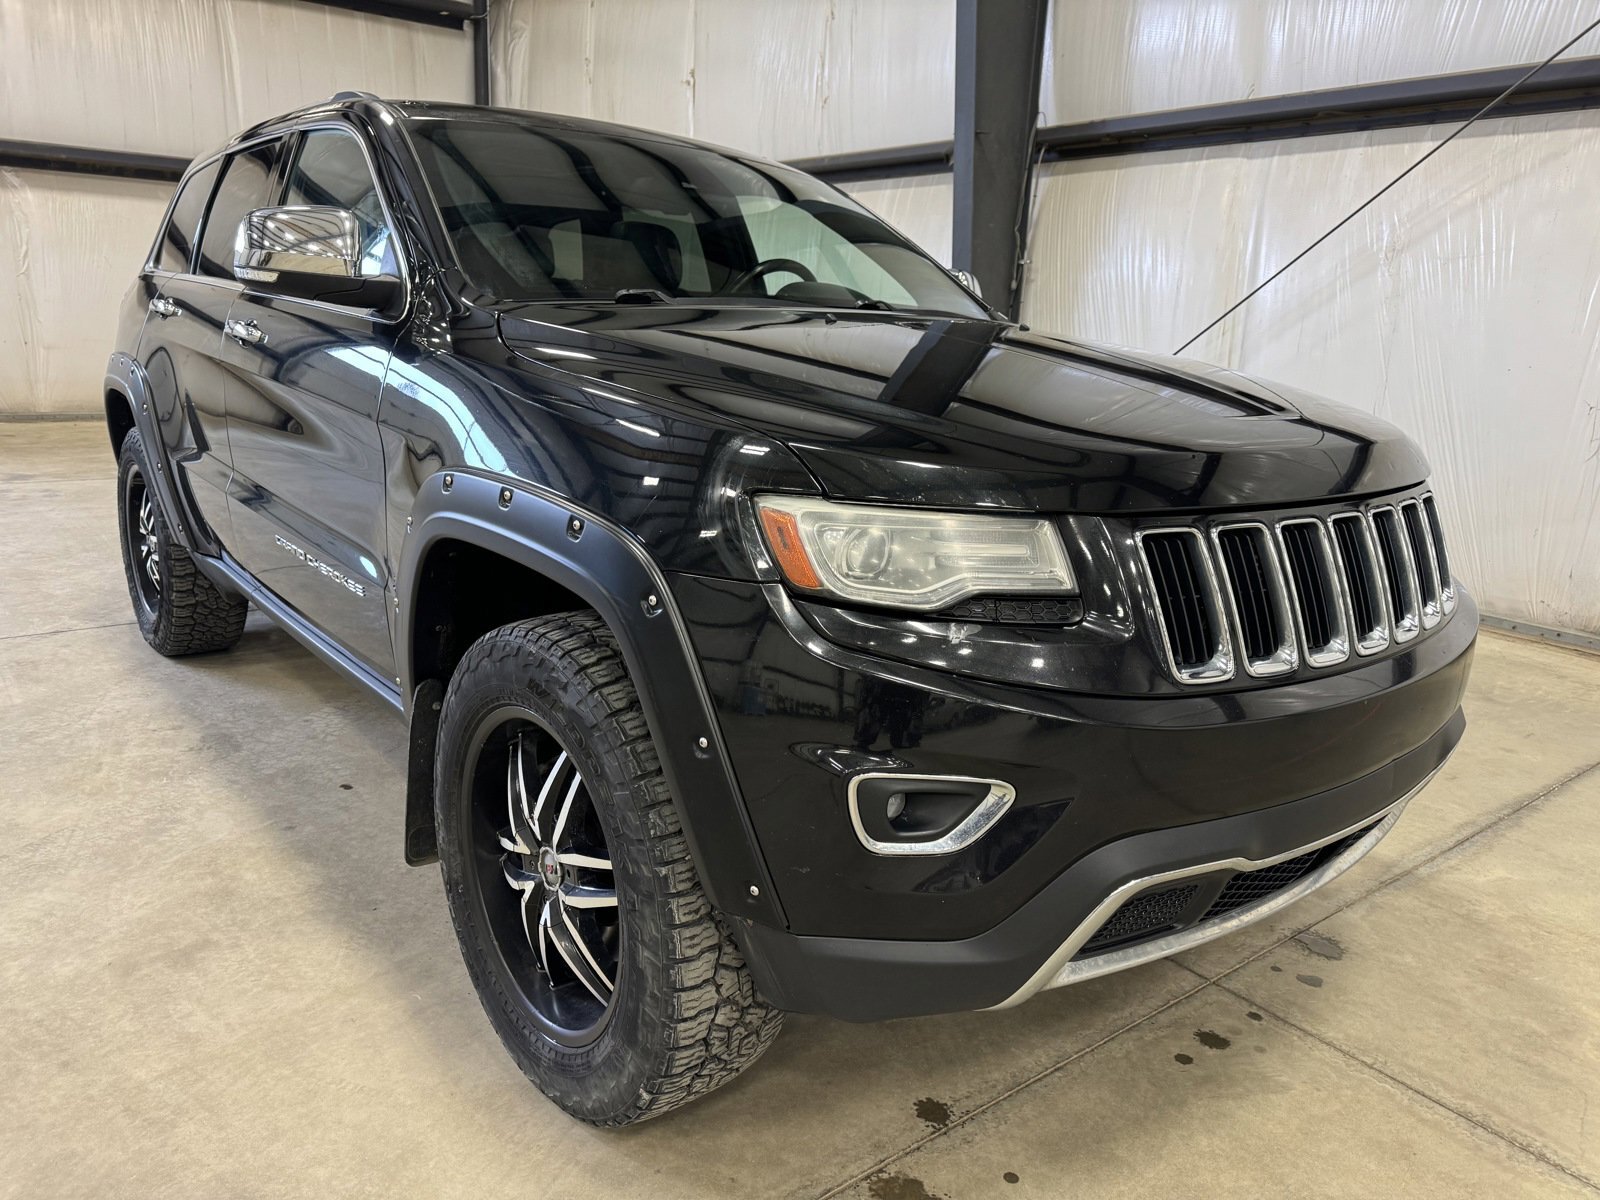 2014 Jeep Grand Cherokee Limited | Leather | AWD | Navigation | Moonroof | 